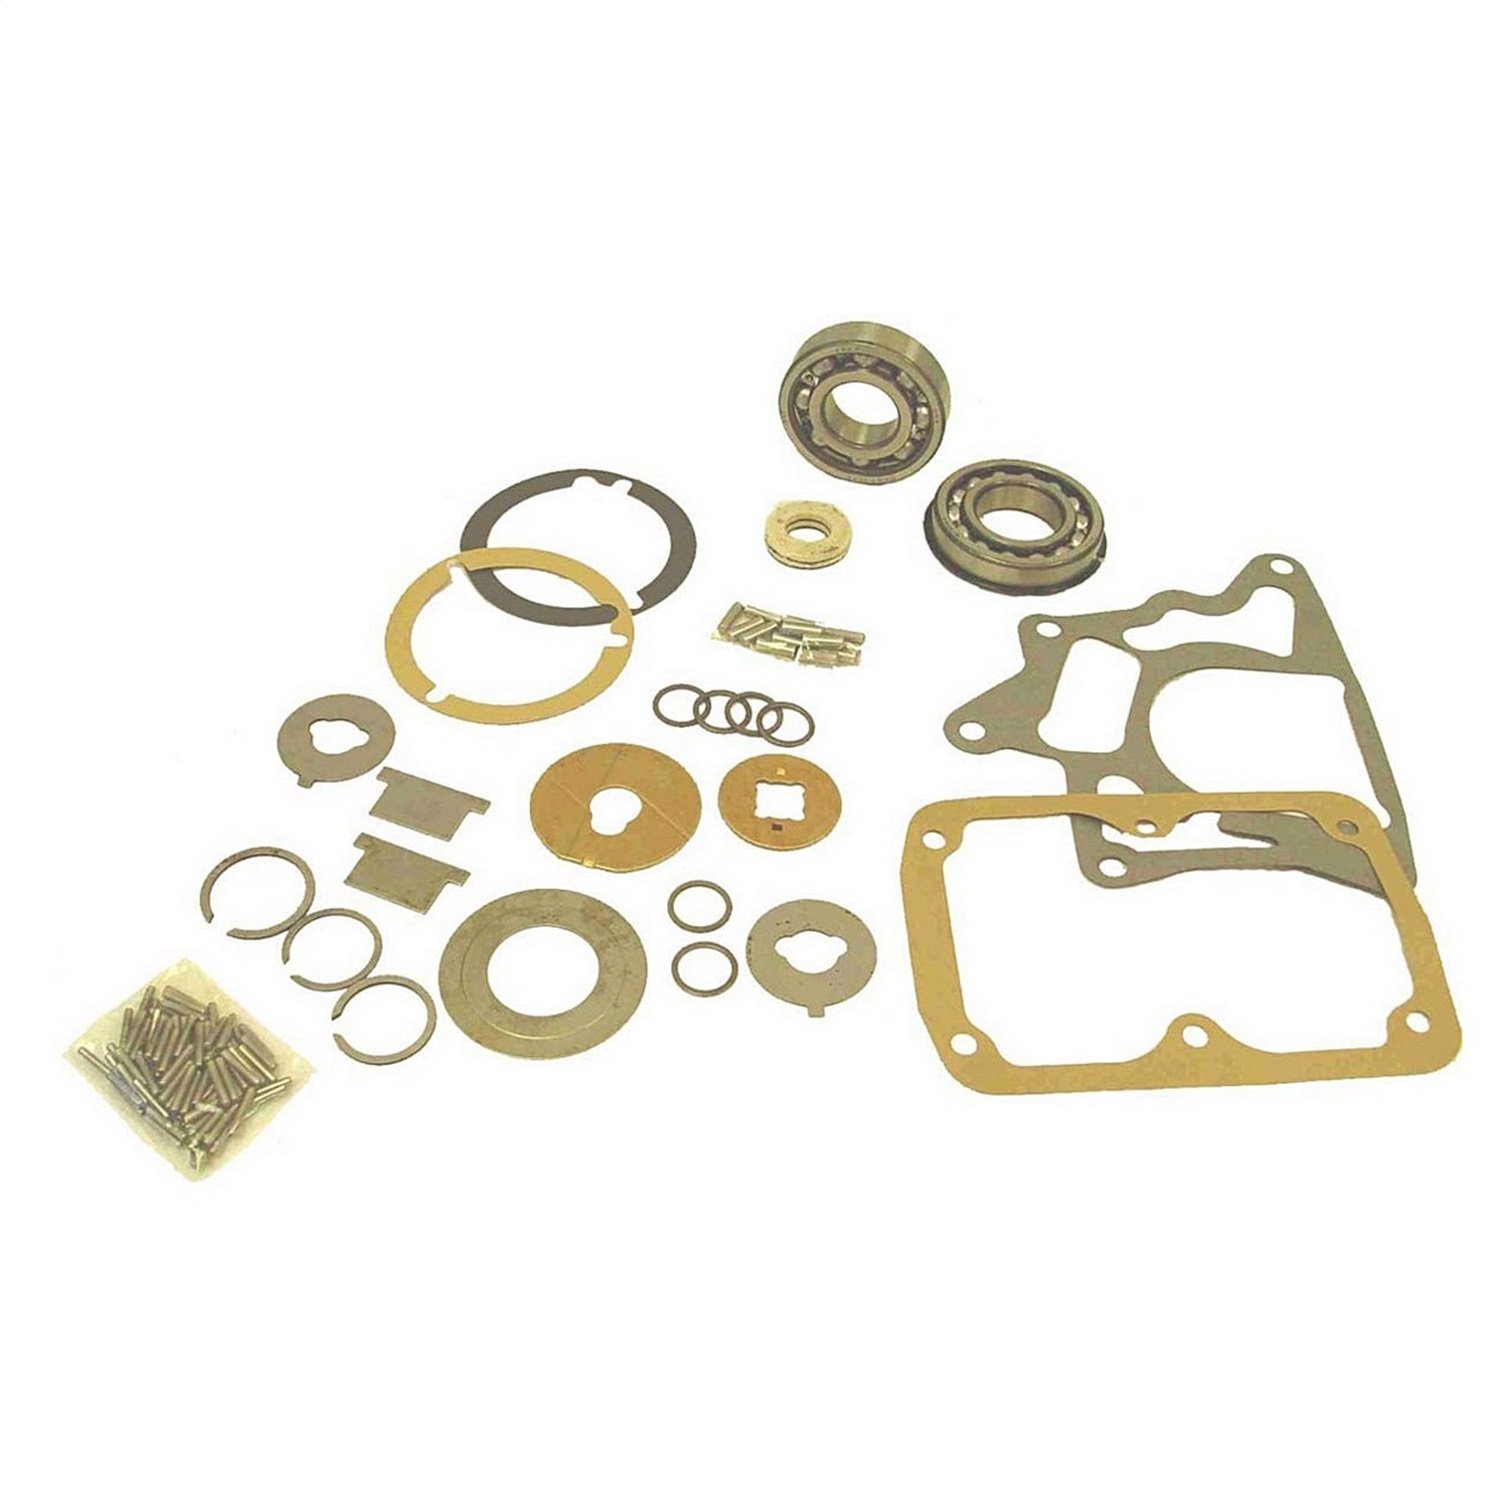 Transmission Overhaul kit has been created specifically for the Borg-Warner T90 3-speed manual trans